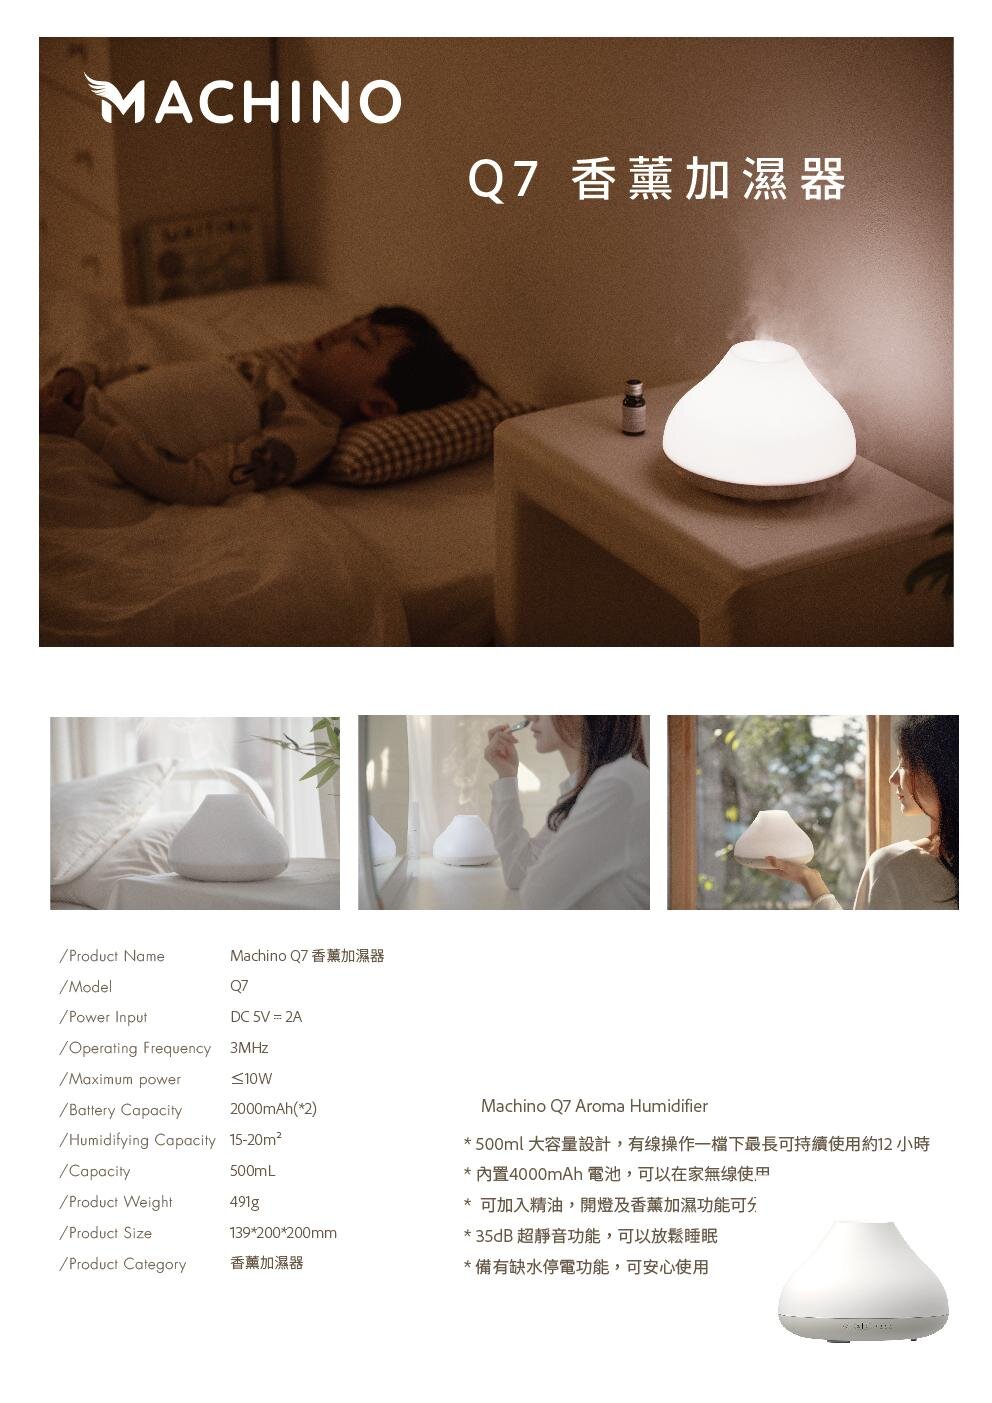 Machino - Q7 Aromatherapy Humidifier [Licensed in Hong Kong]